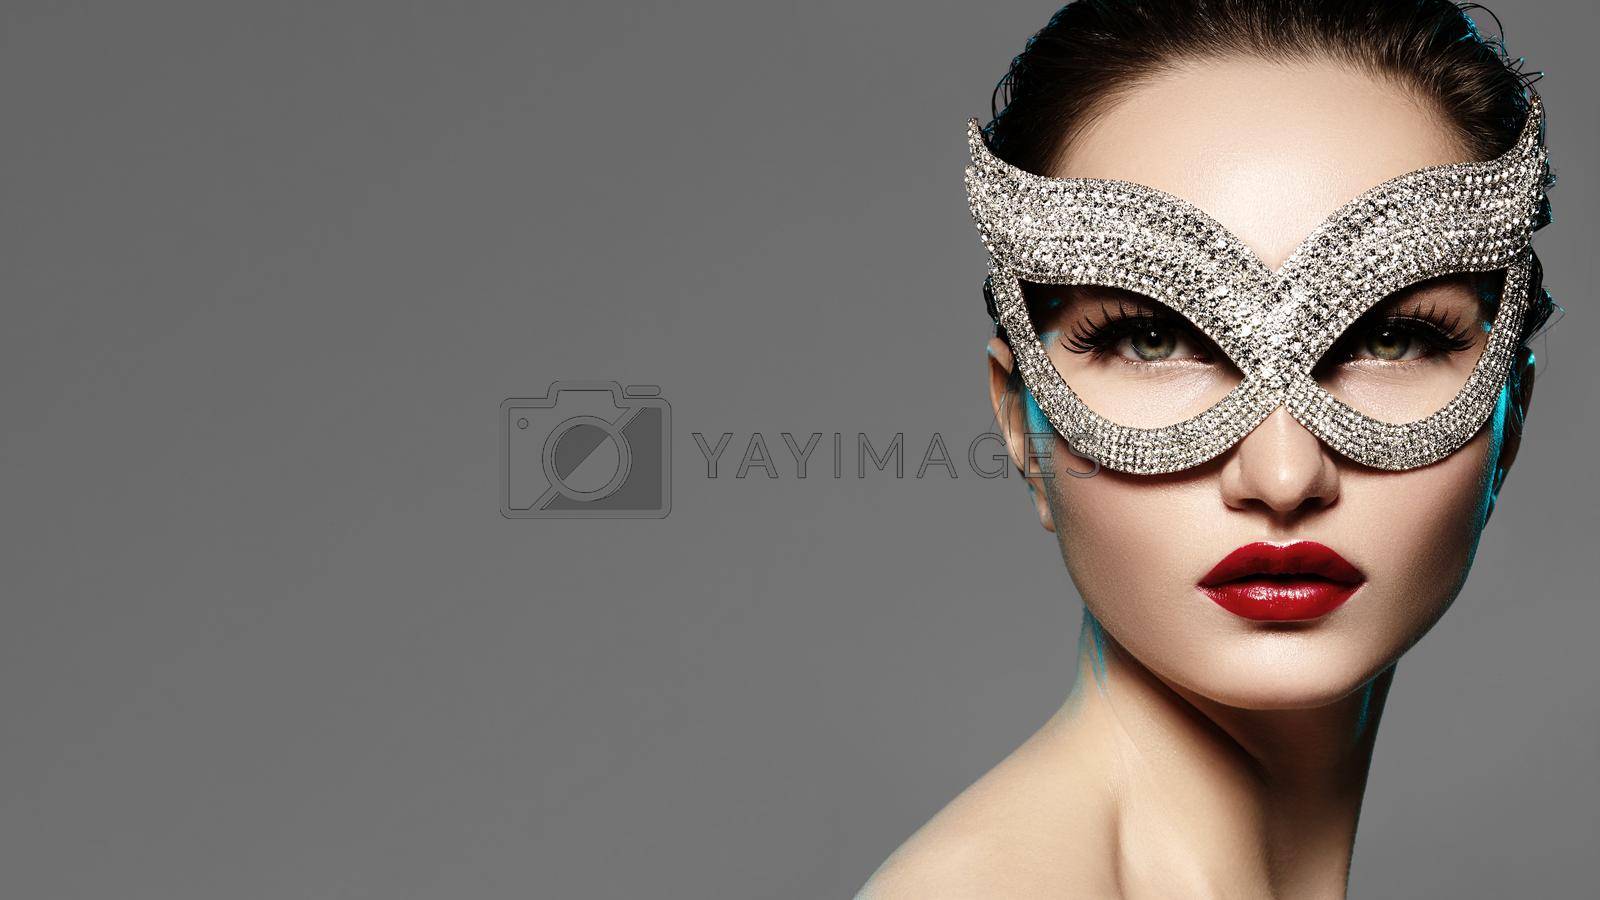 Royalty free image of Beautiful Model with Fashion Lips Makeup Wearing Bright Brilliant Mask. Masquerade Style Woman. Holiday Celebration Look by MarinaFrost